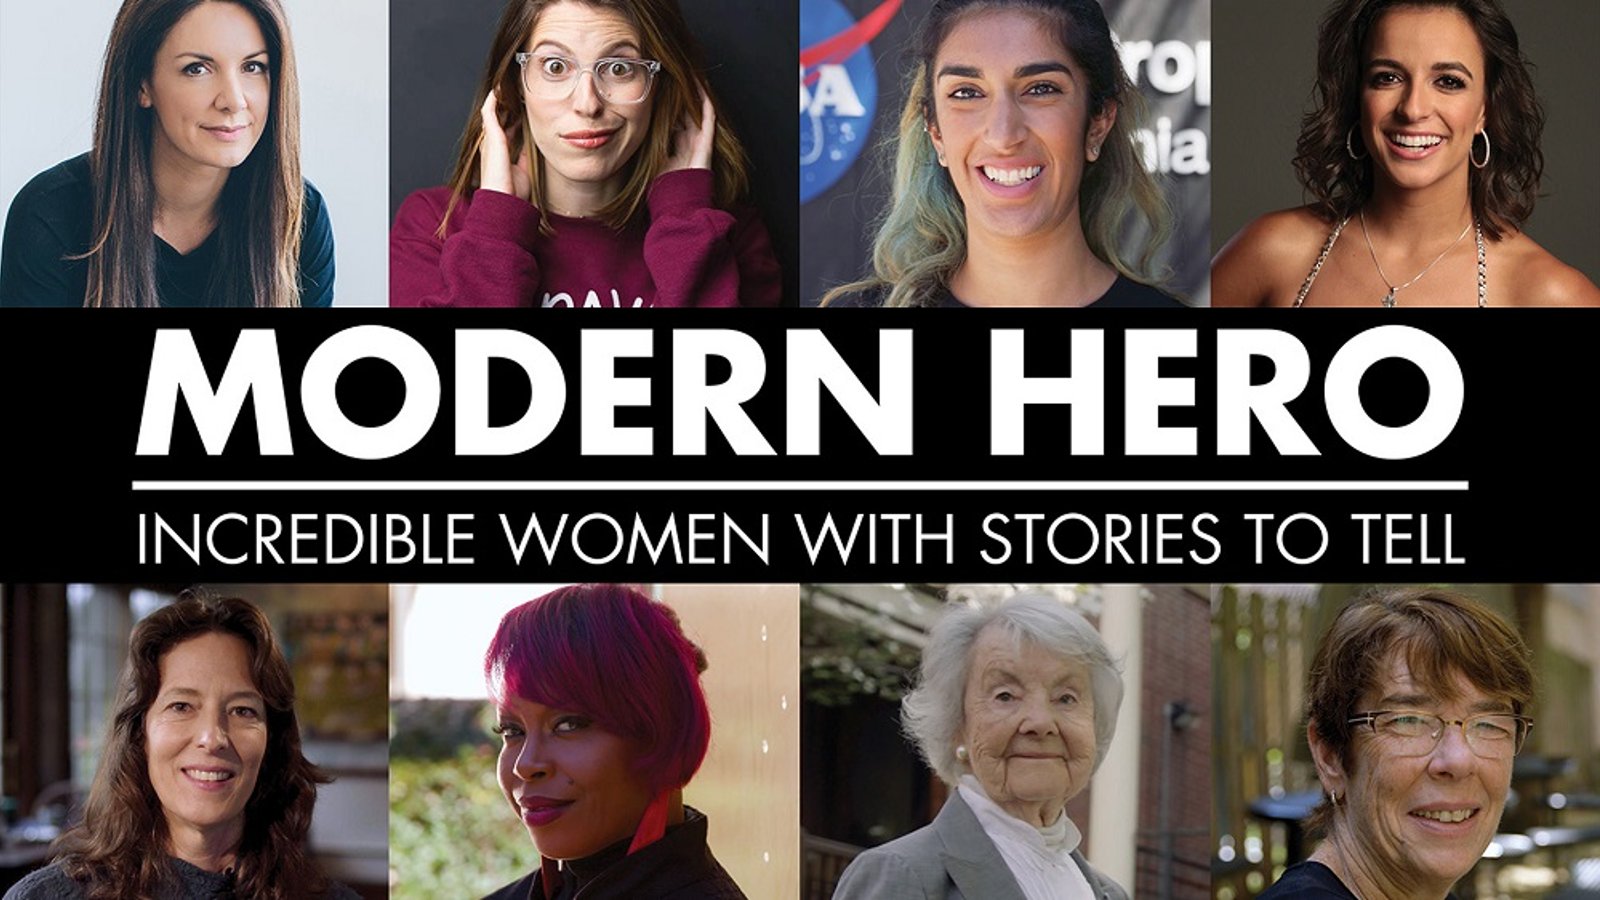 Modern Hero - Incredible Women with Stories to Tell